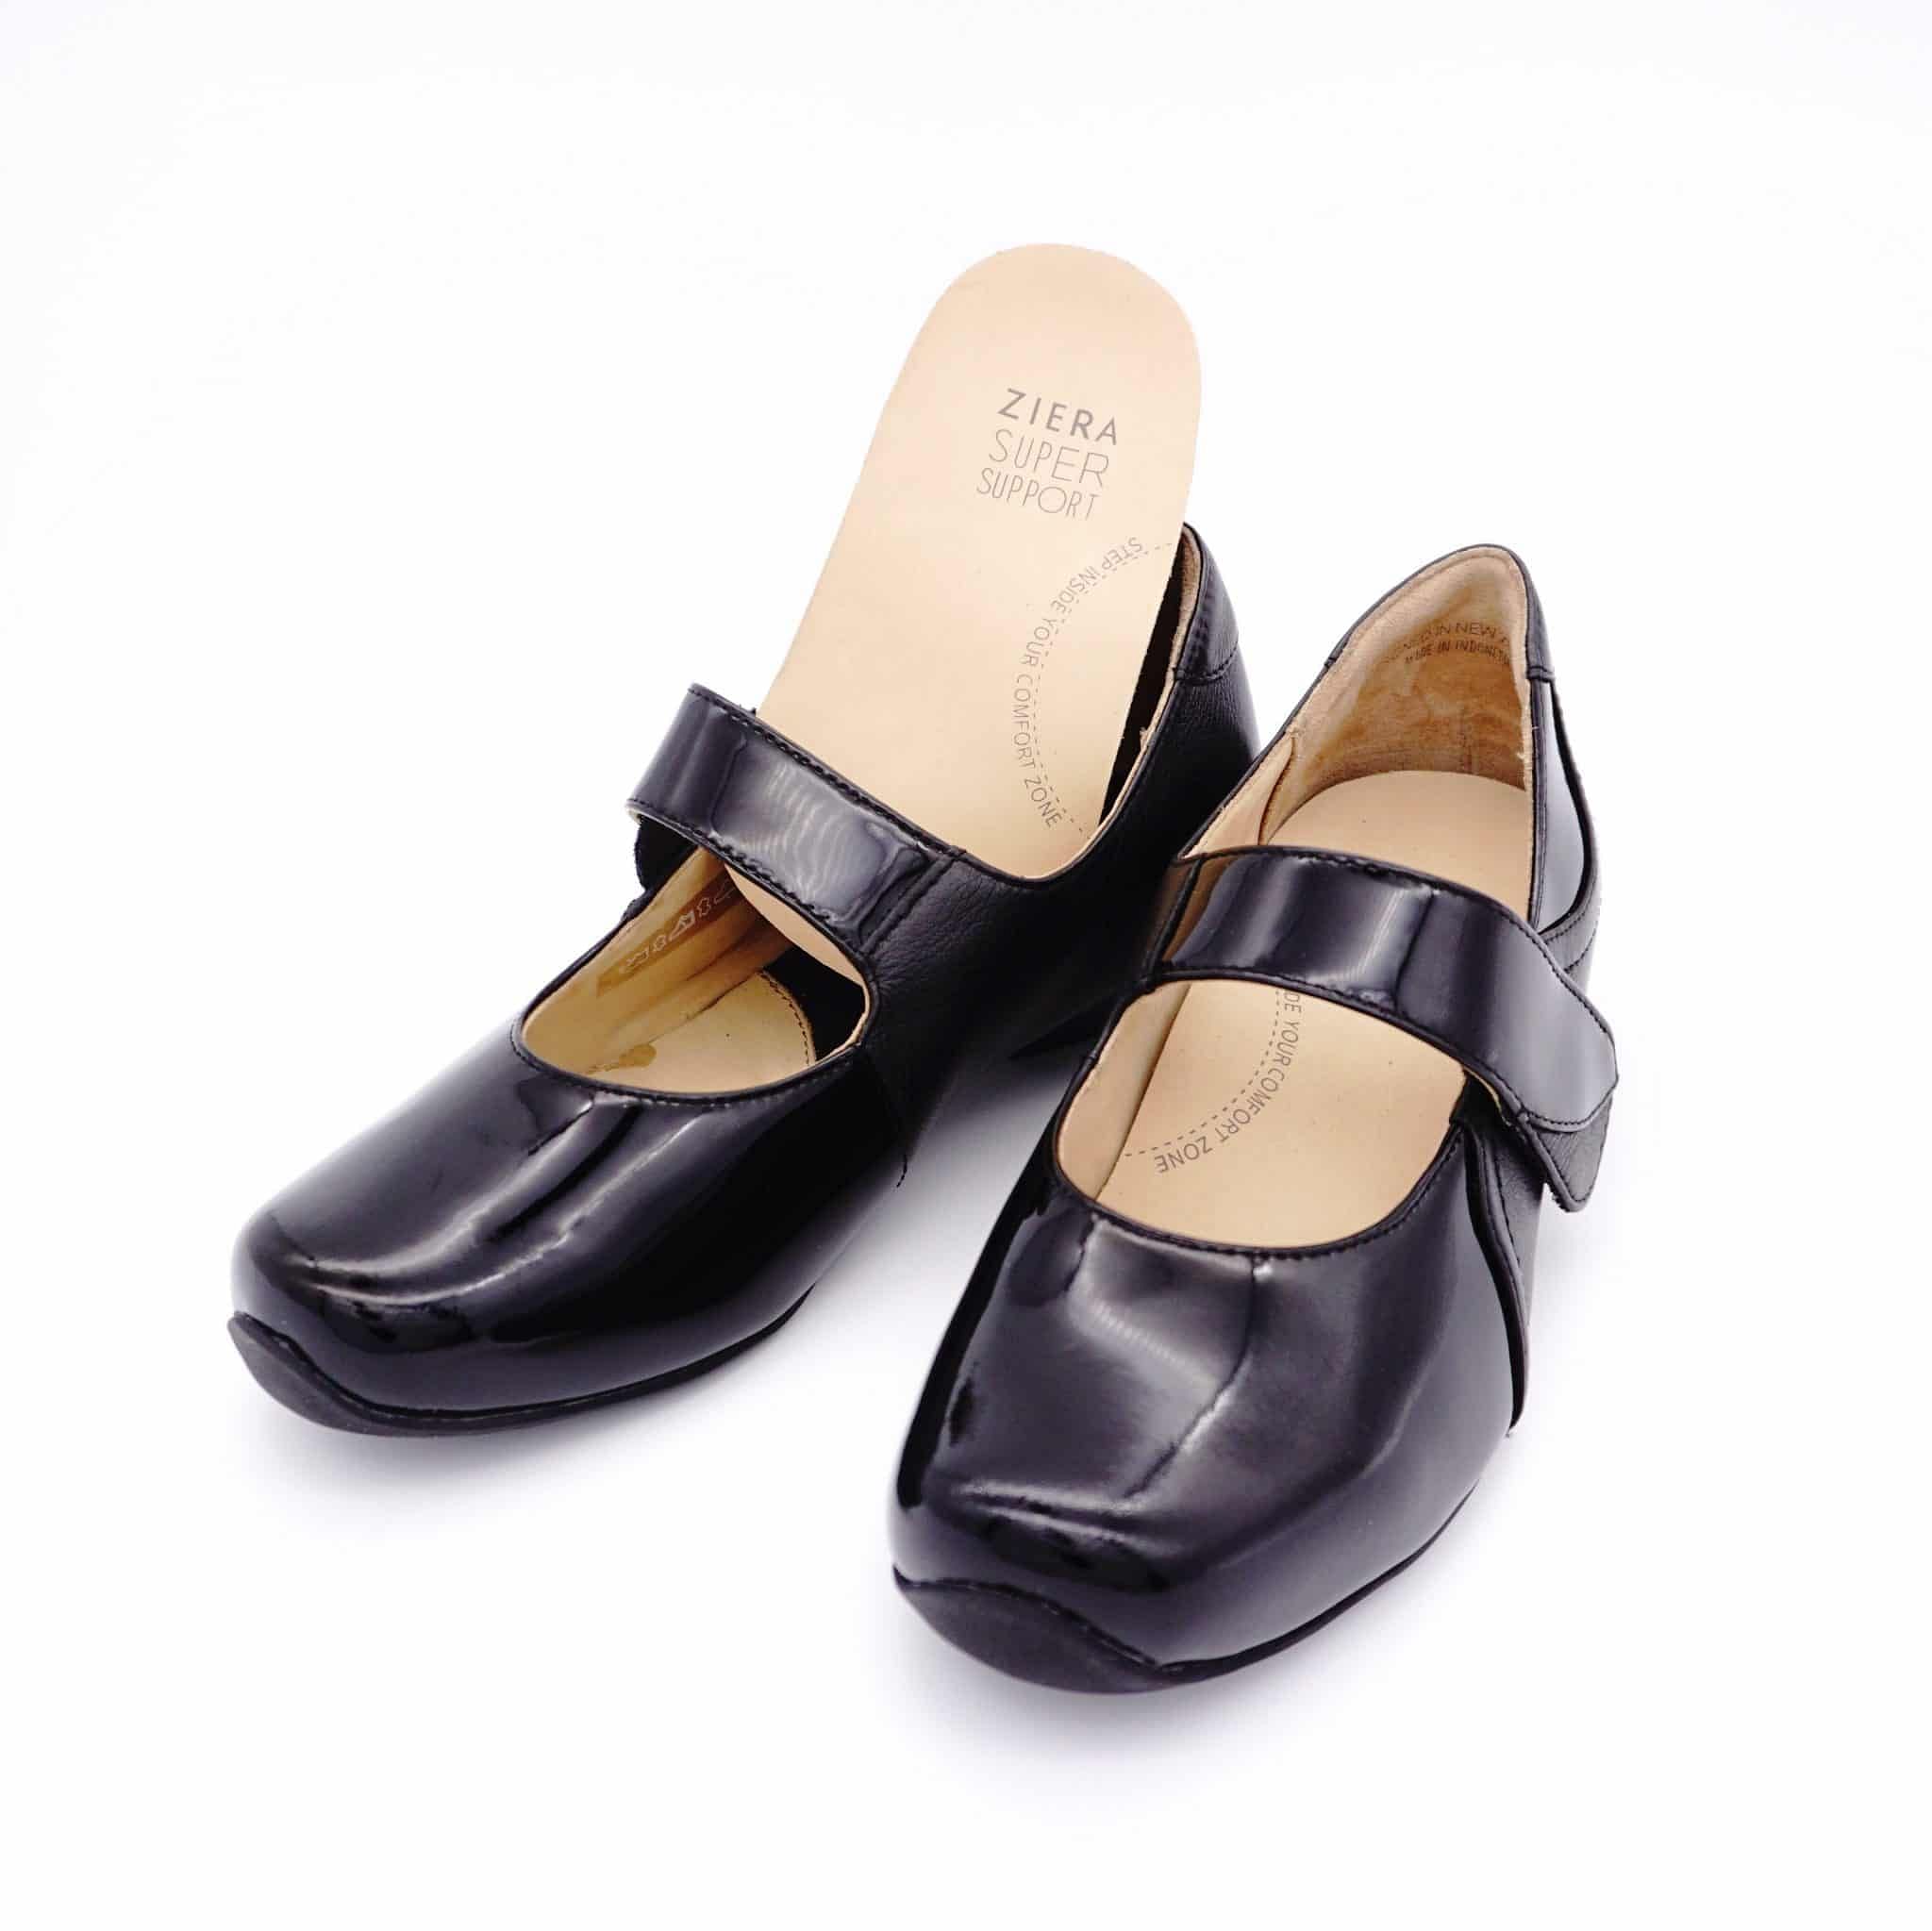 Cassidy Pumps by ZIERA Comfort Shoes